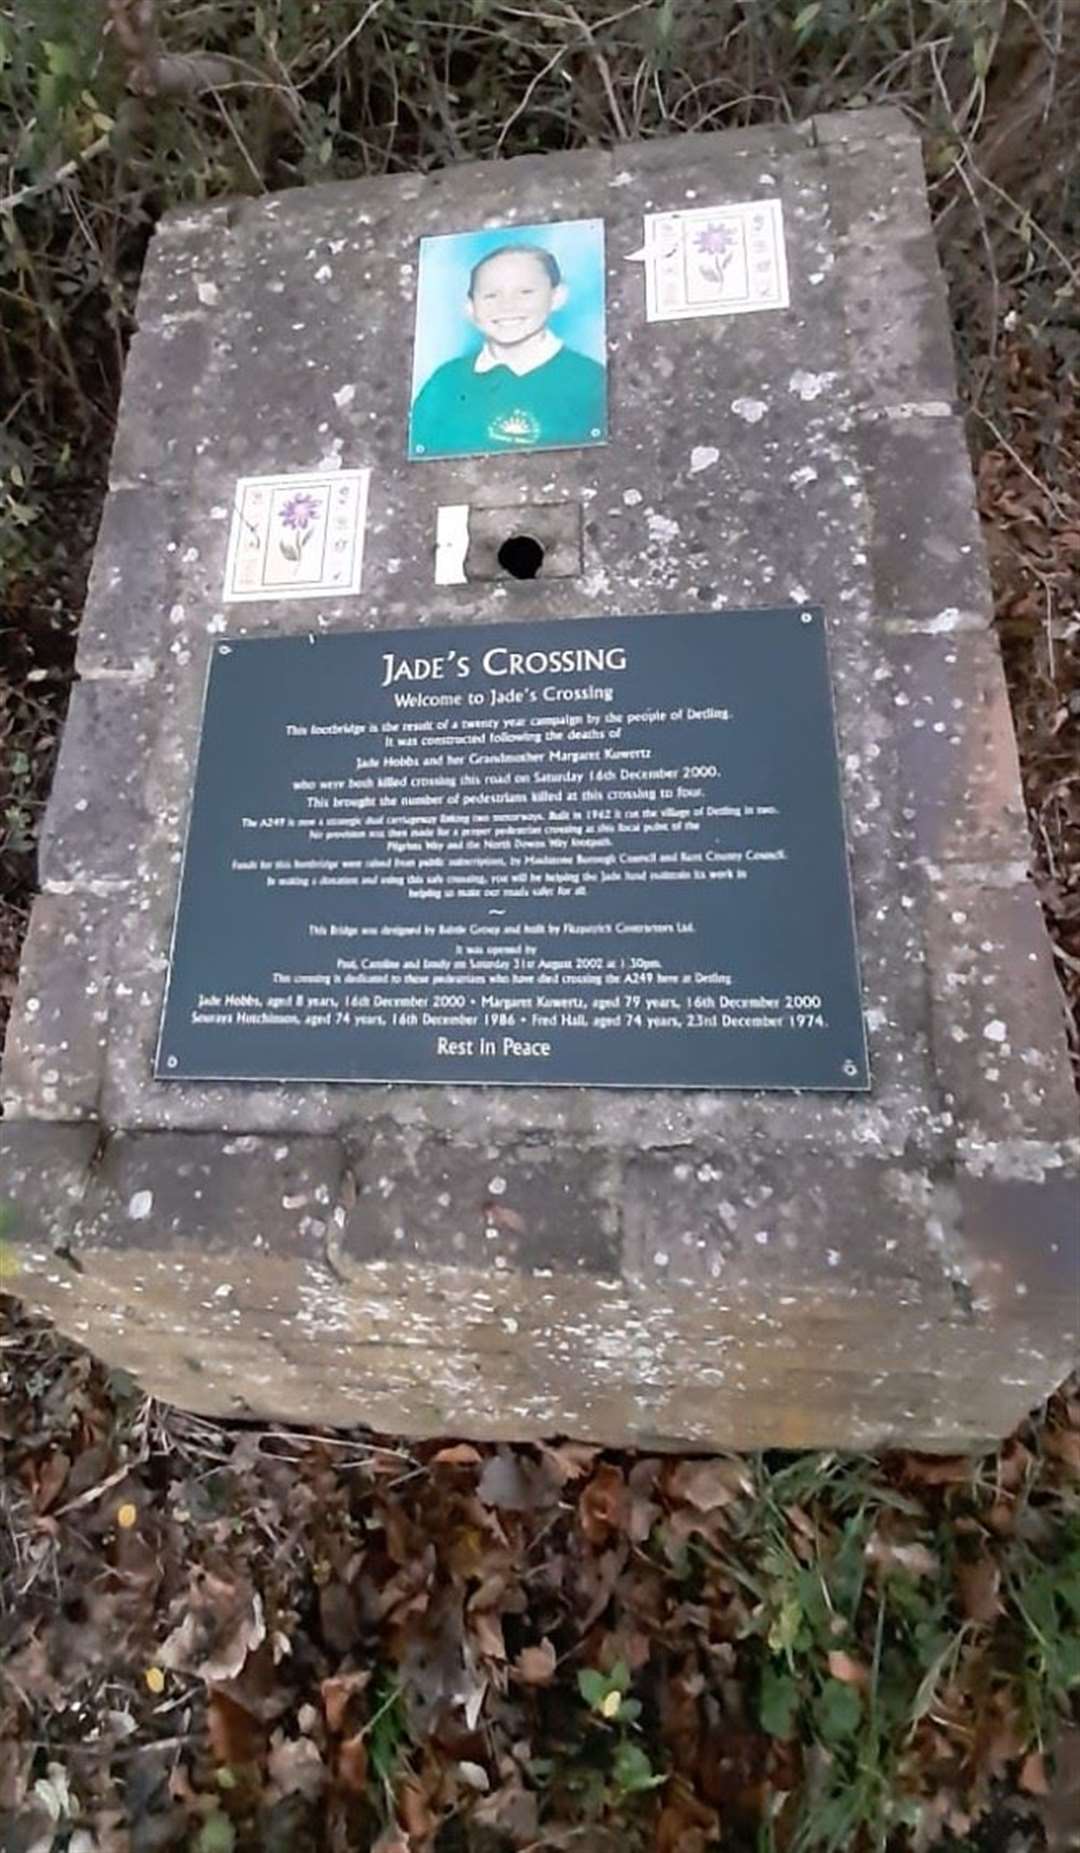 A plaque near the crossing, to Jade and the others who died crossing the A249 at Detling